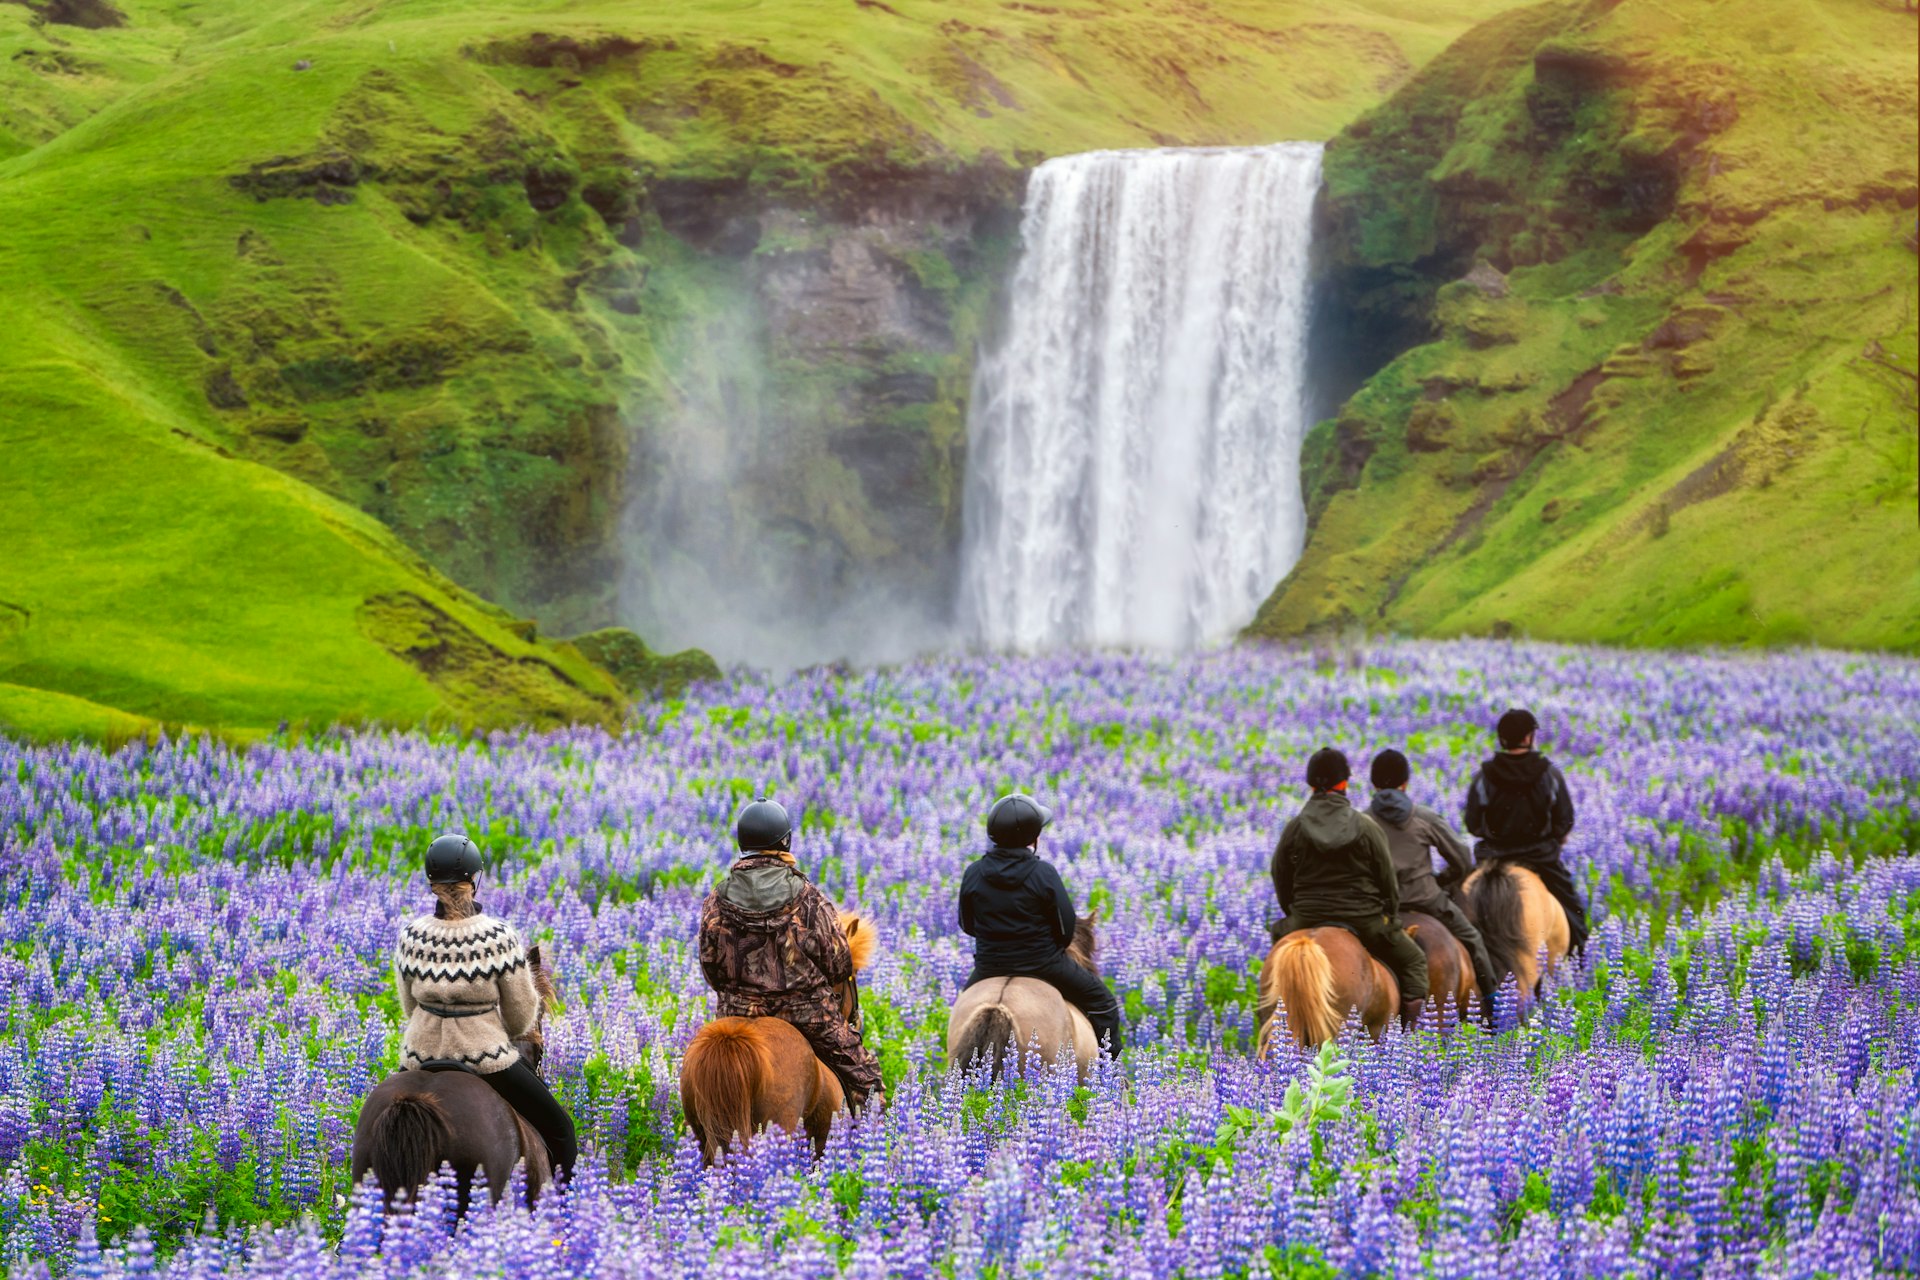 Tourists ride horses towards a waterfall through a field with tall purple flowers